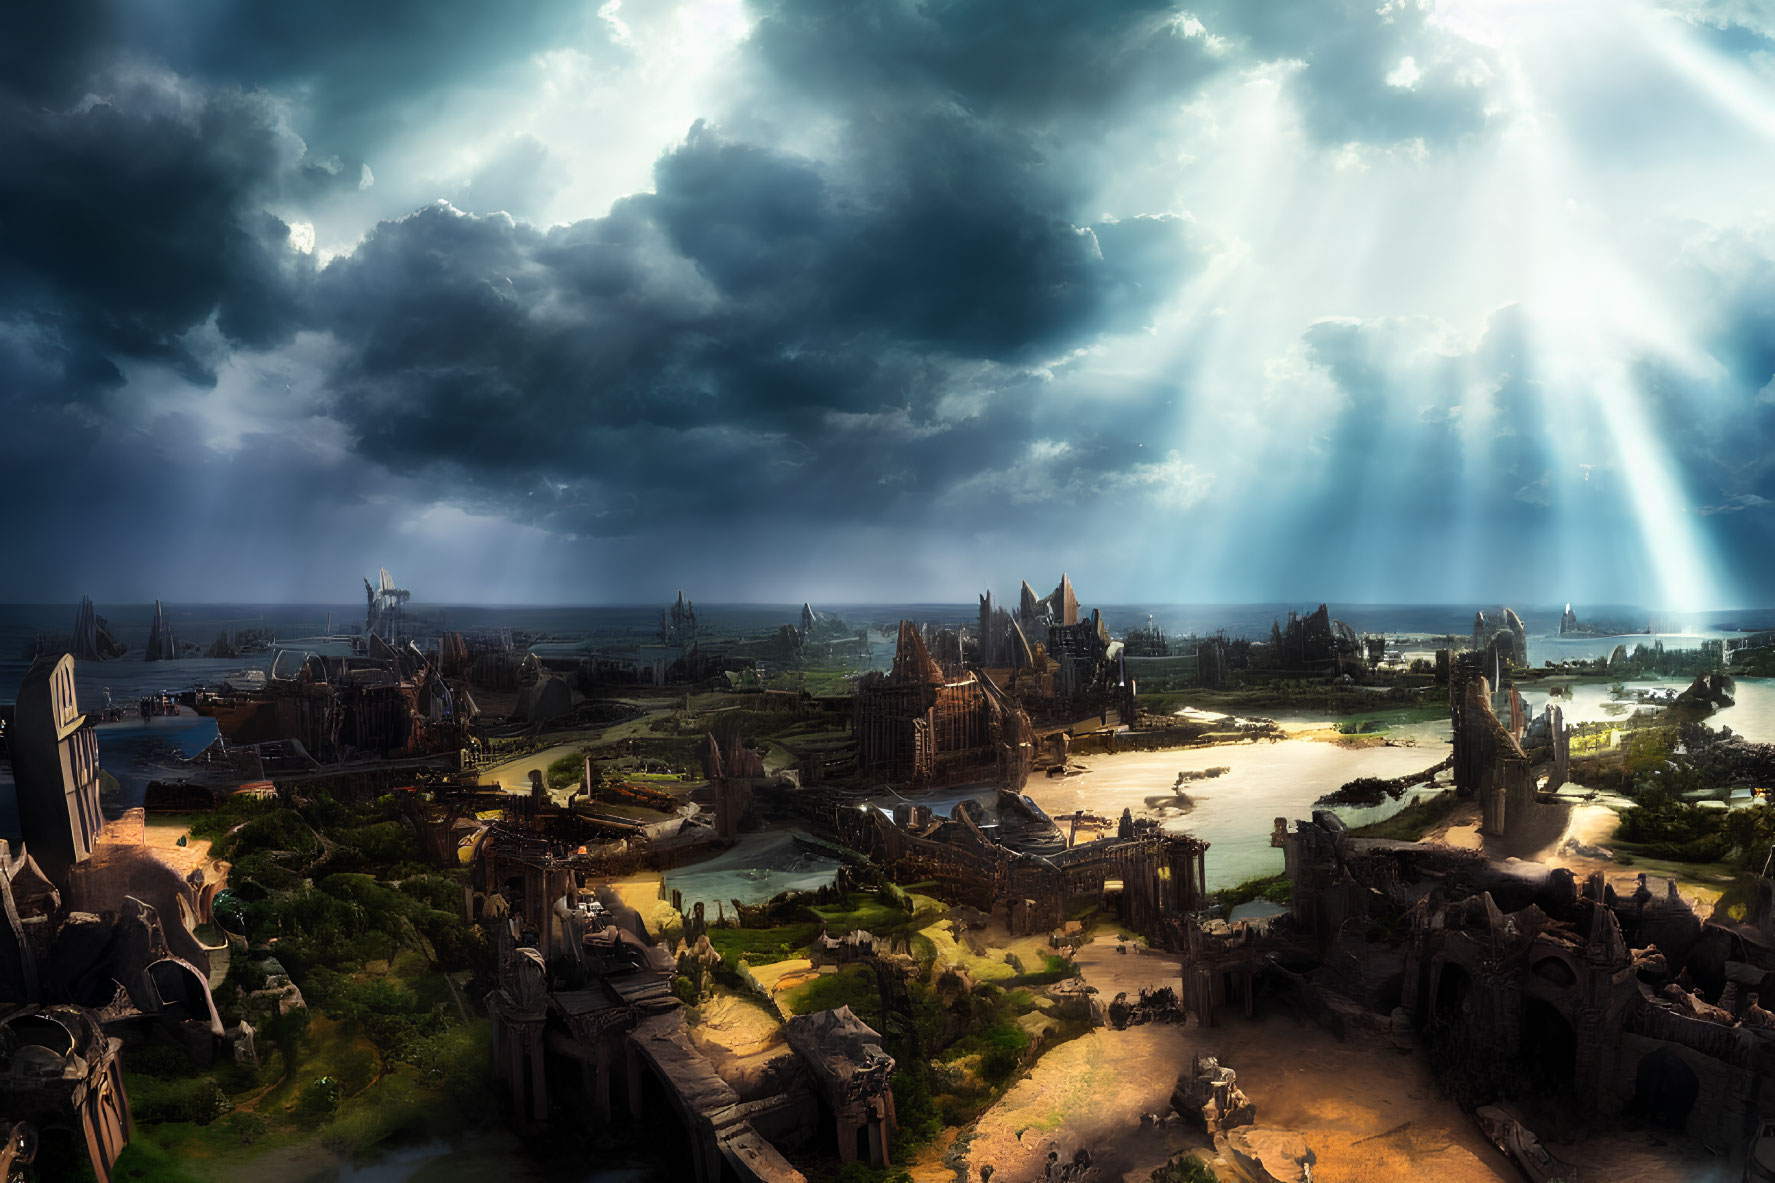 Sunlight illuminates fantasy landscape with medieval buildings and statues